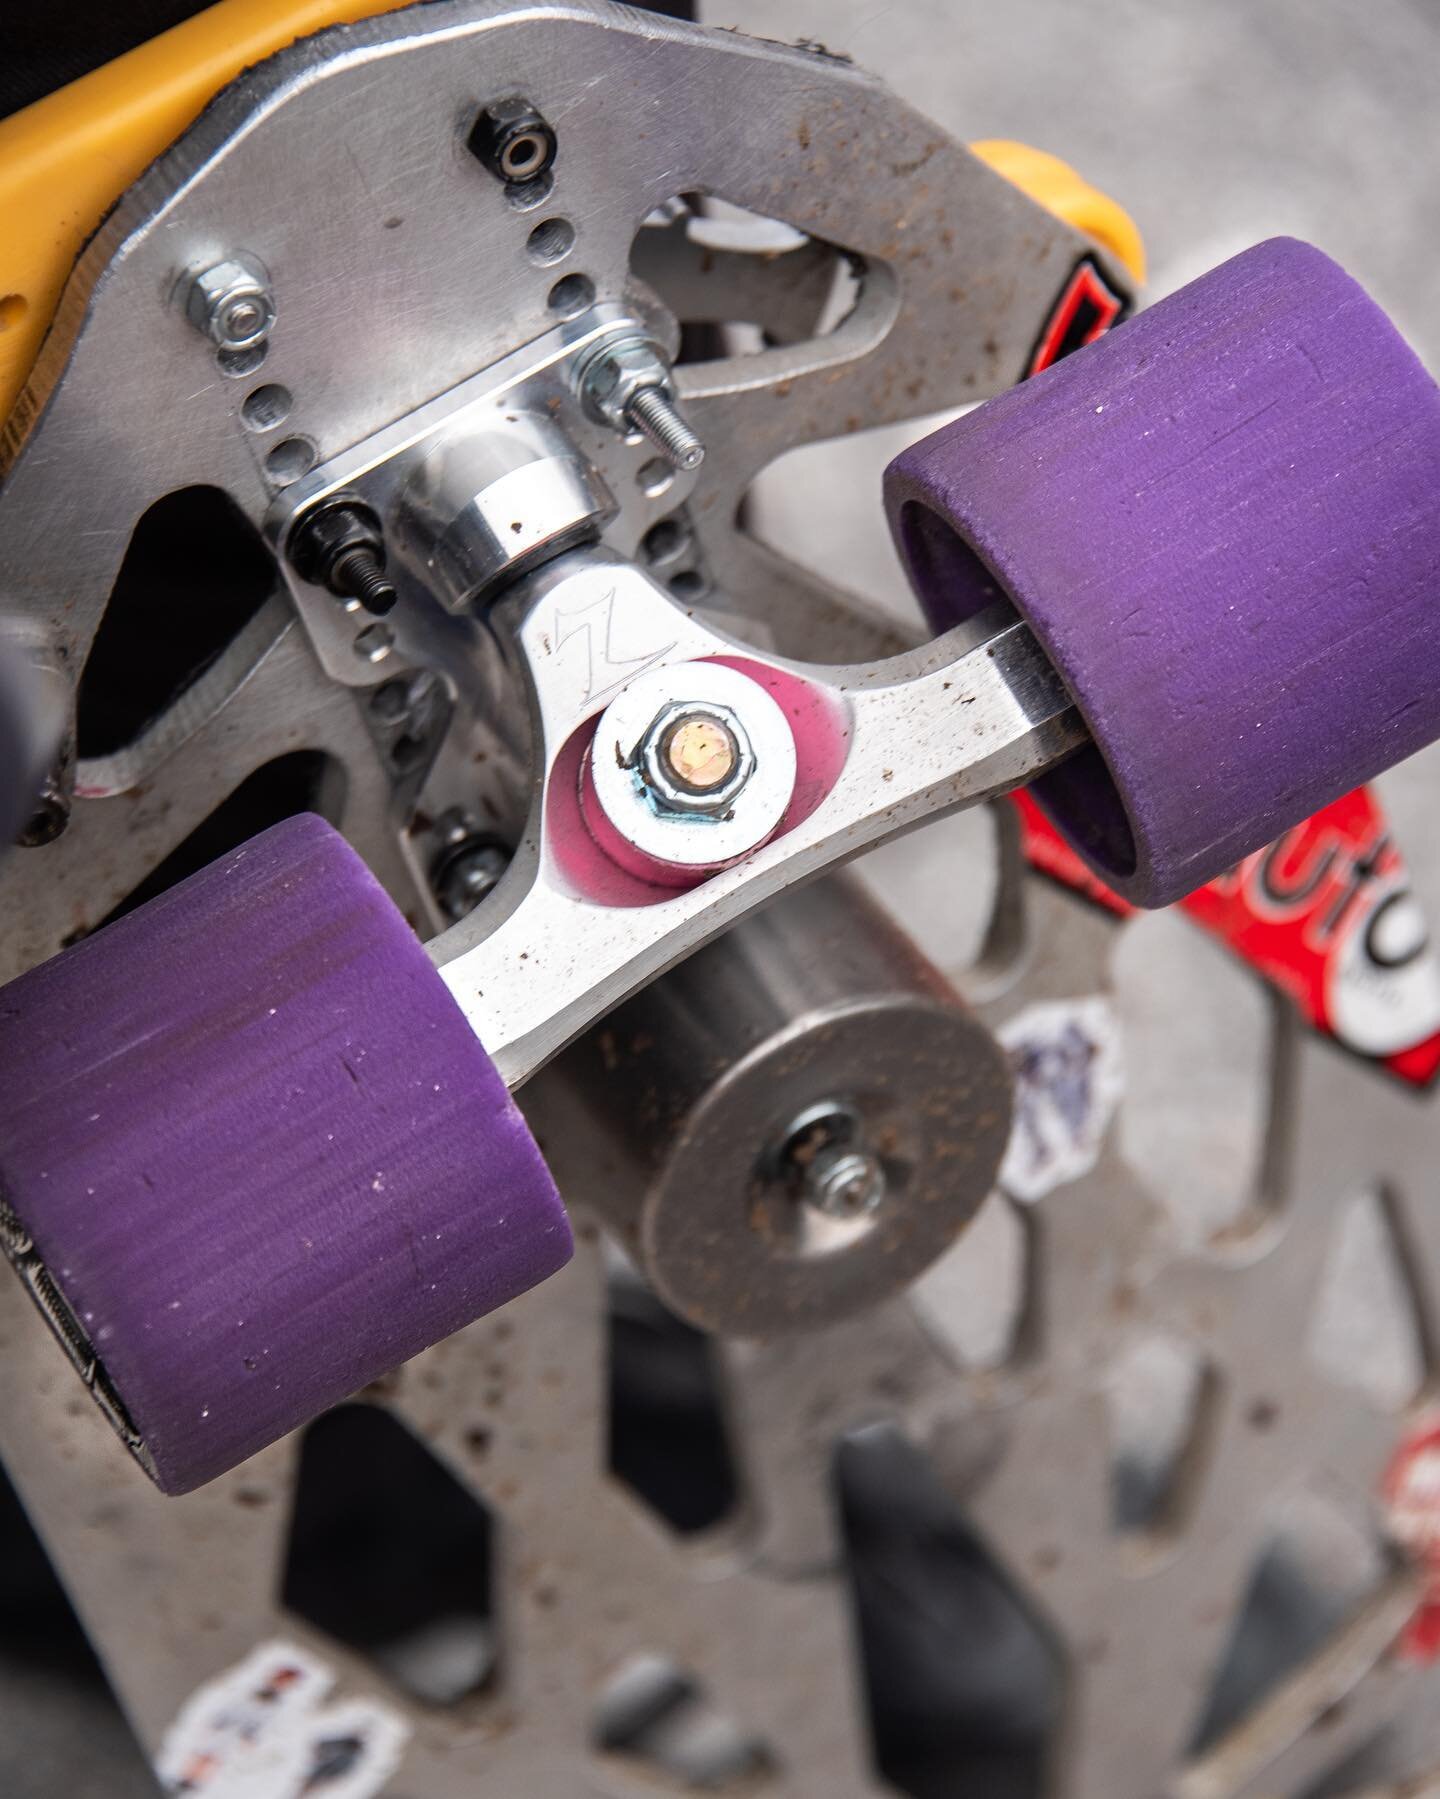 Dialing in the new Zealous trucks on some purple K-Rimes with @dabsville_cowboi!
👉@ThreeSixDownhill
#ThreeSixDownhill #longboarding #longboard #downhillskateboarding #surfskate